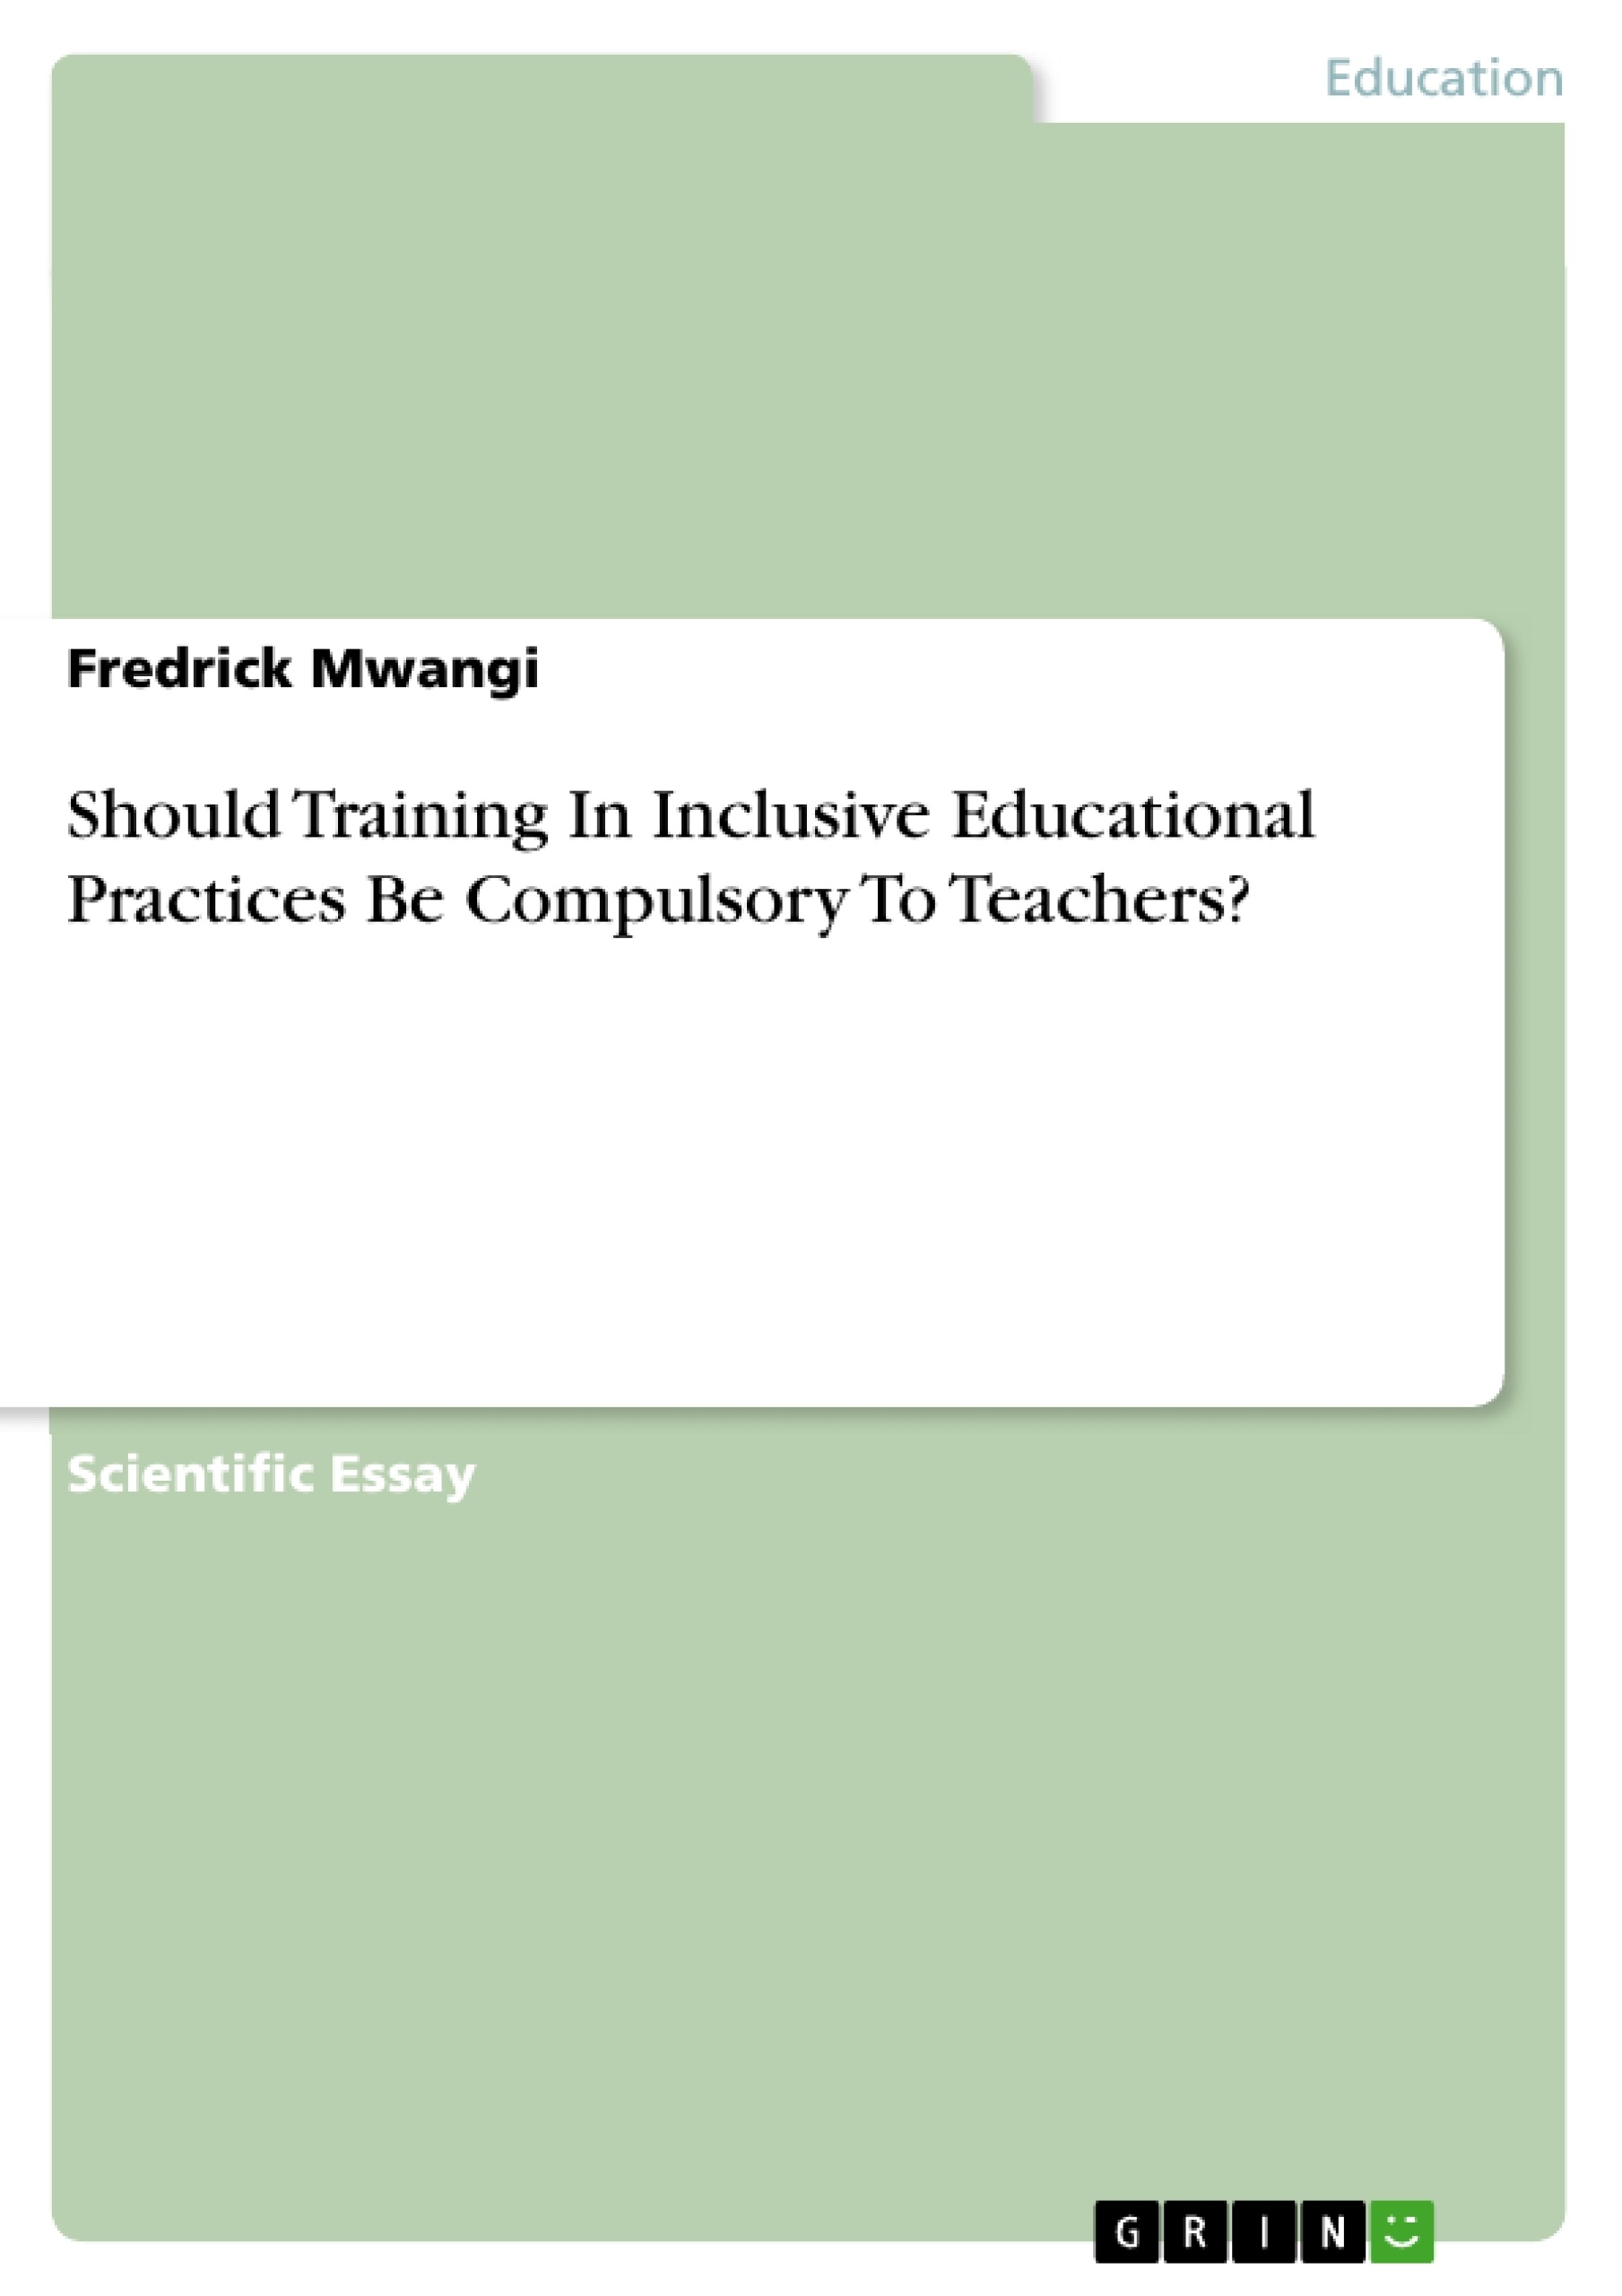 Title: Should Training In Inclusive Educational Practices Be Compulsory To Teachers?